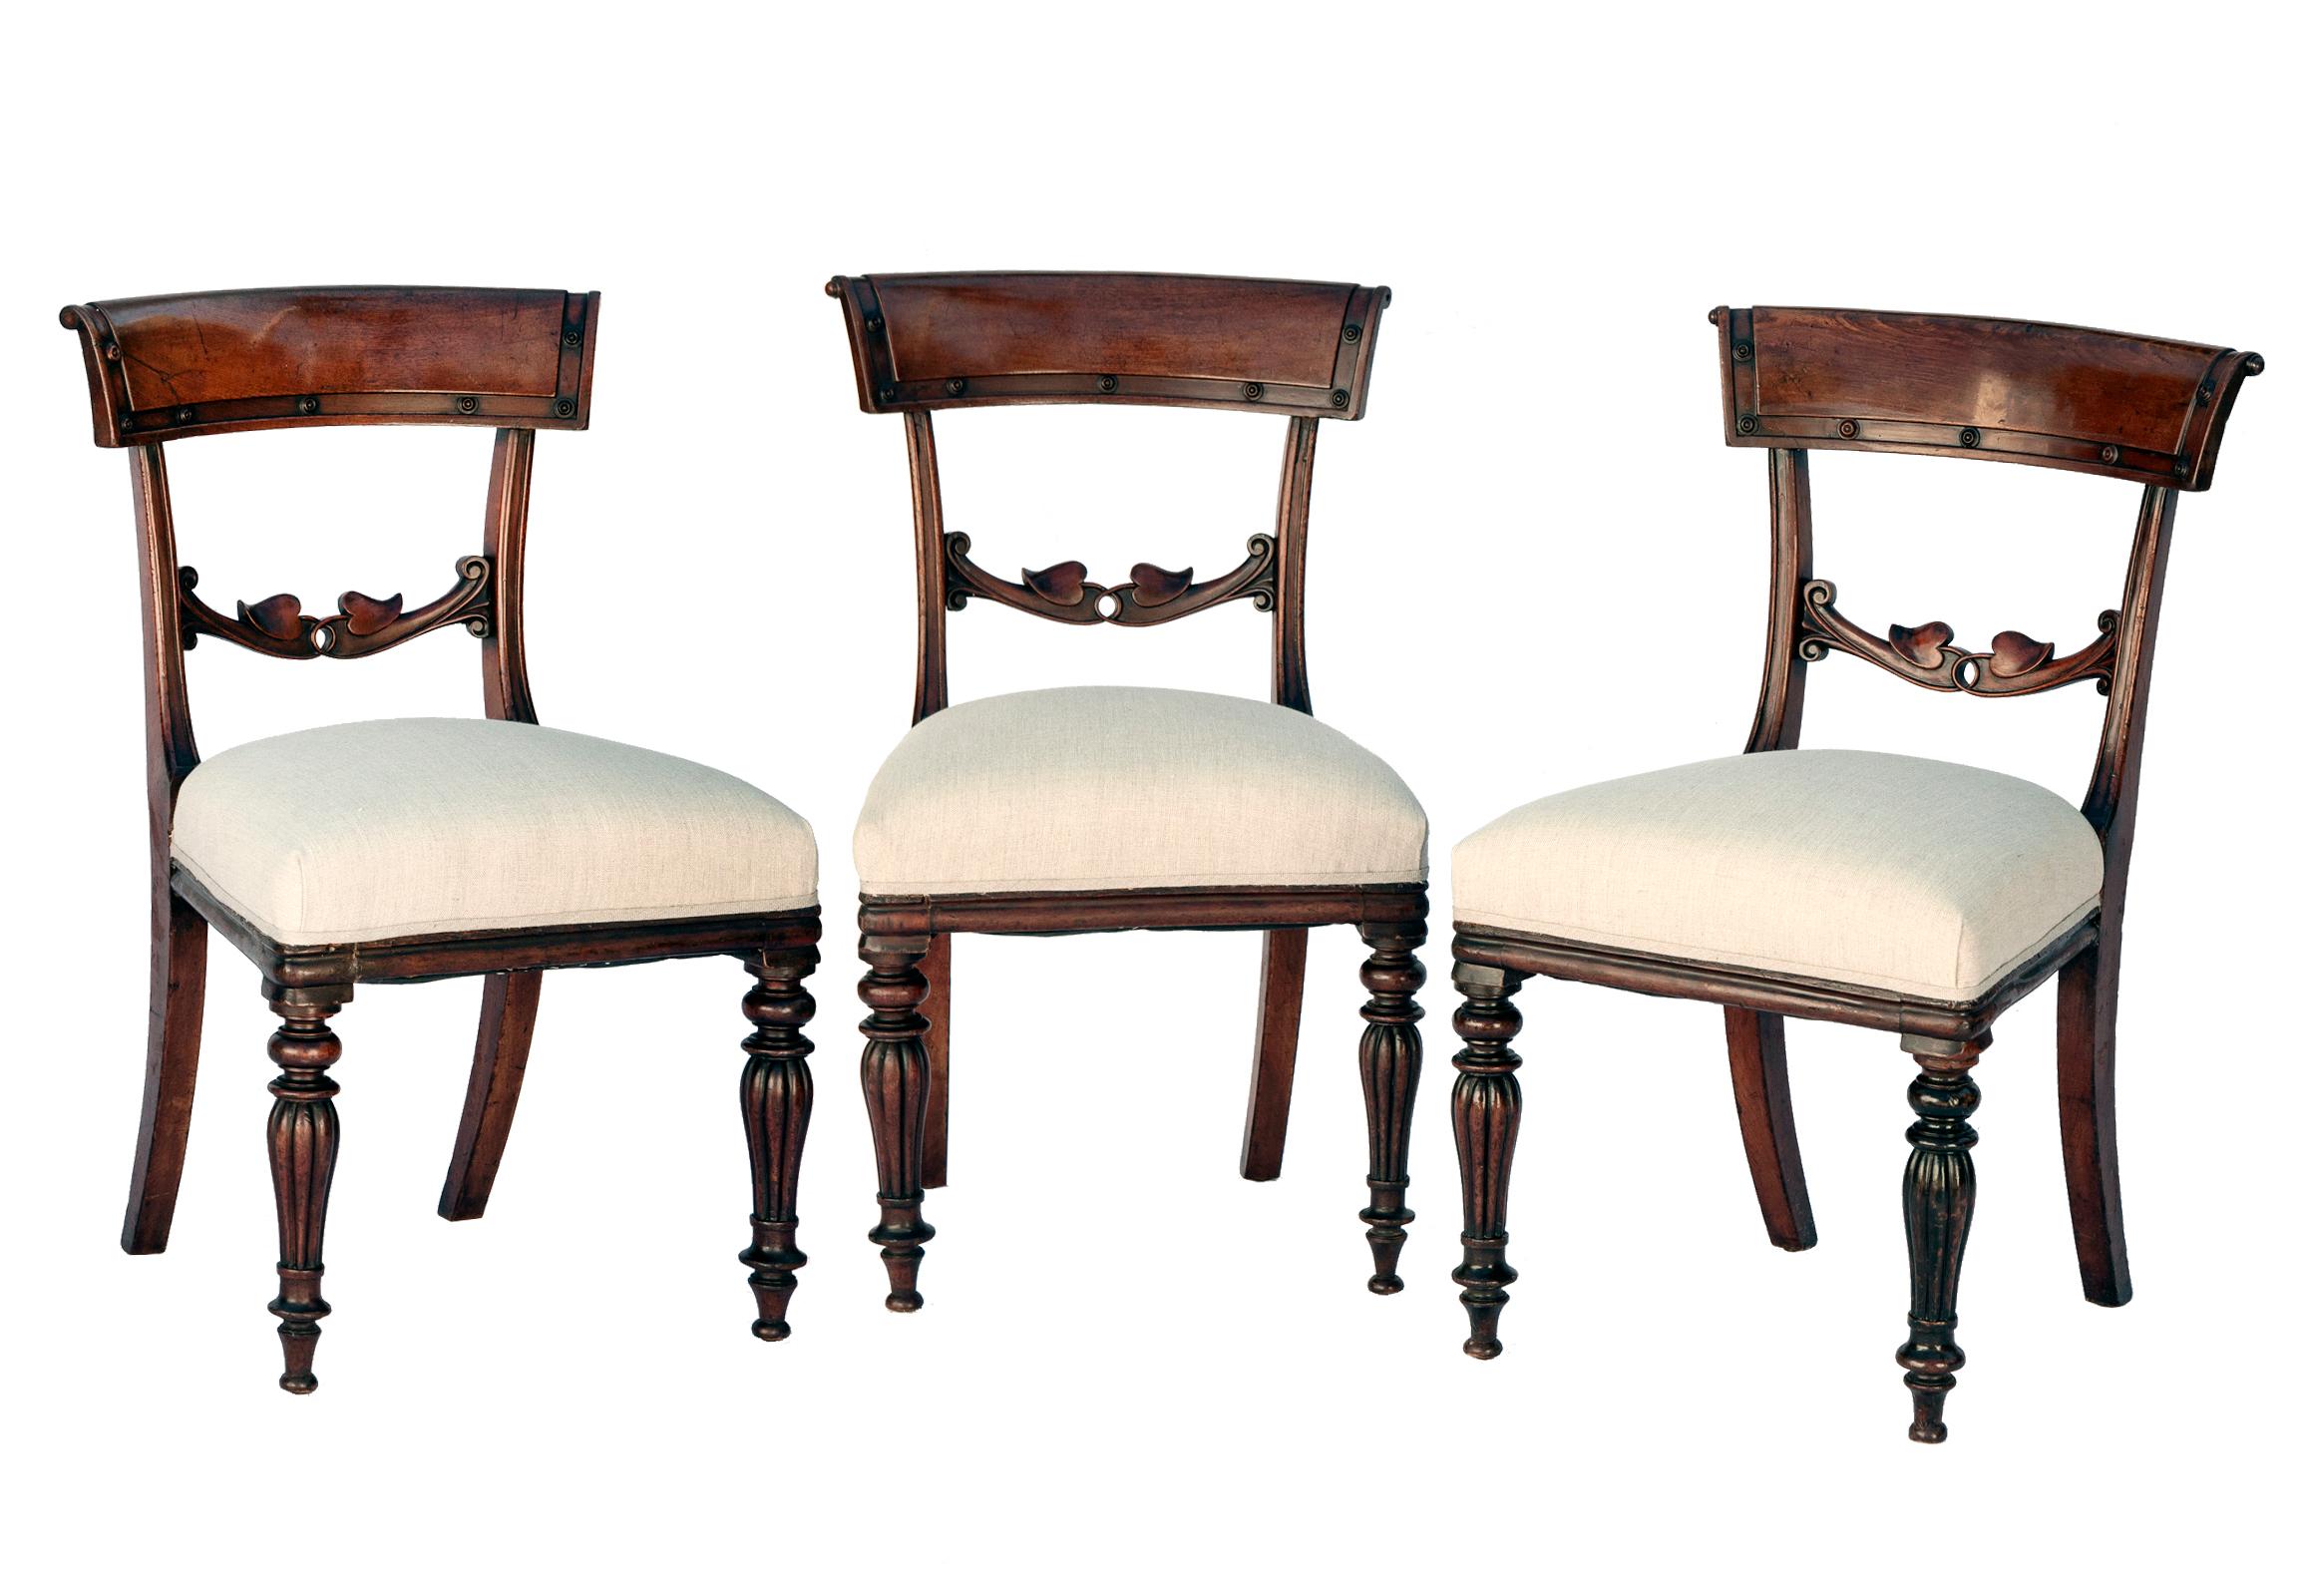 Exceptional set of six Neoclassical Klismos Empire period mahogany dining chairs fearing a dramatic polished finish in dark mahogany. The seats have been entirely reconstructed & covered in Belgian linen with self ribbon welting.
The chairs are